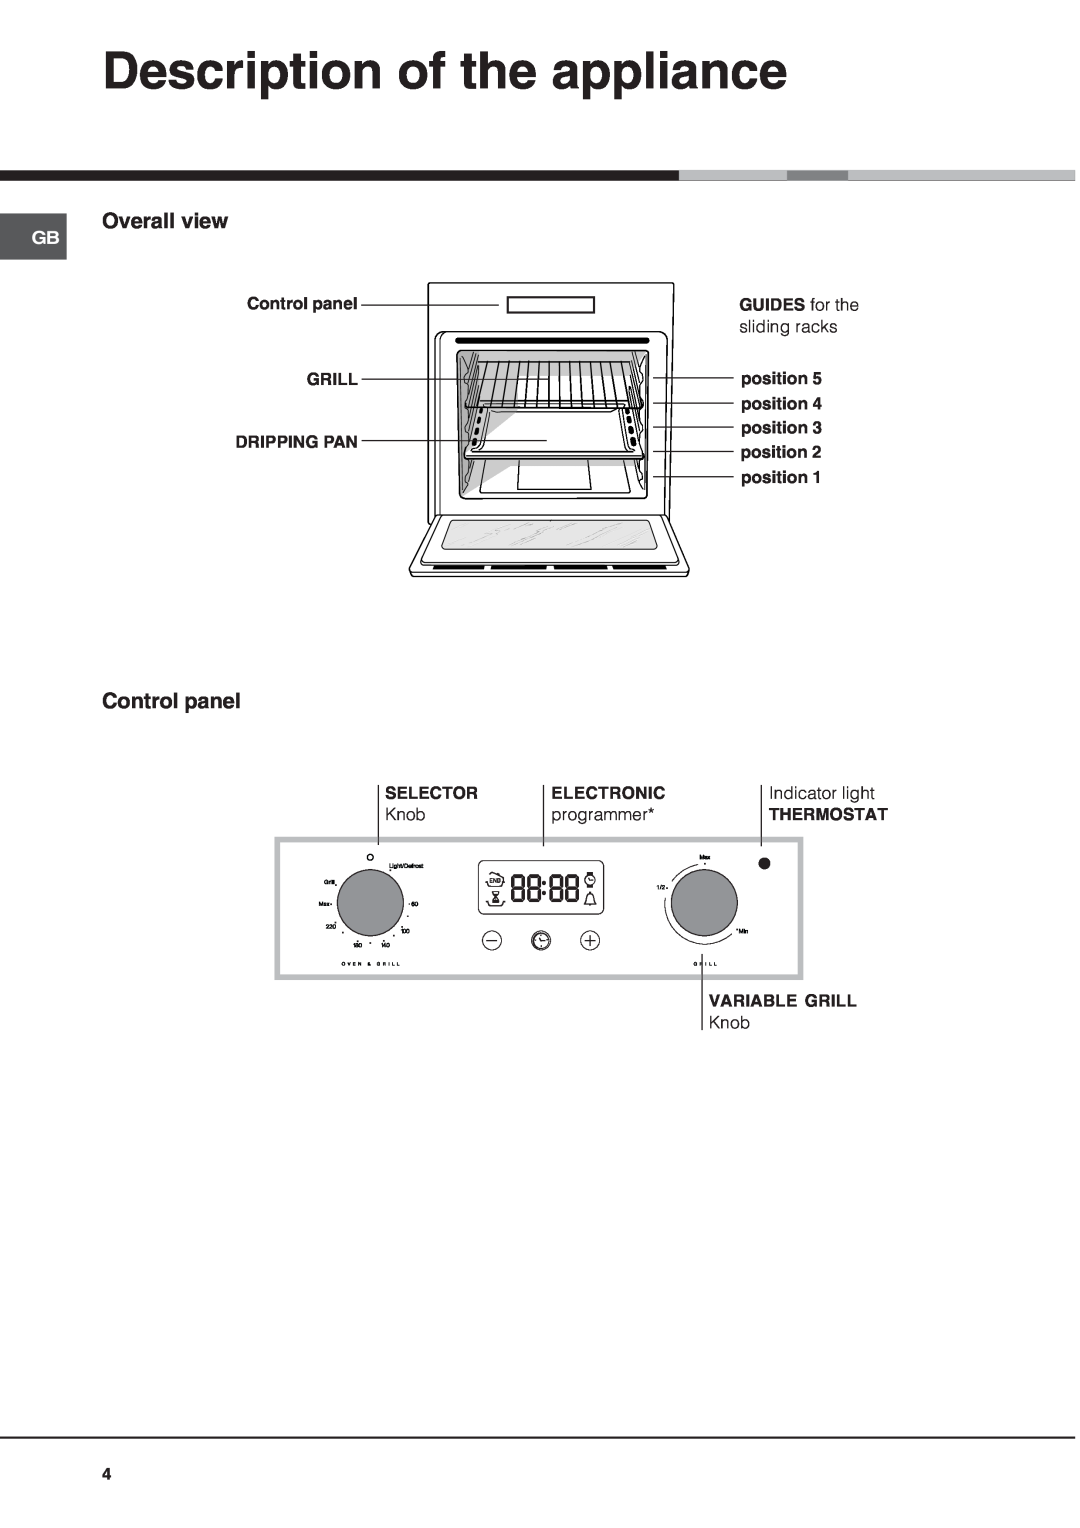 Hotpoint BS53X1 operating instructions Description of the appliance, Control panel GRILL DRIPPING PAN, GUIDES for the 